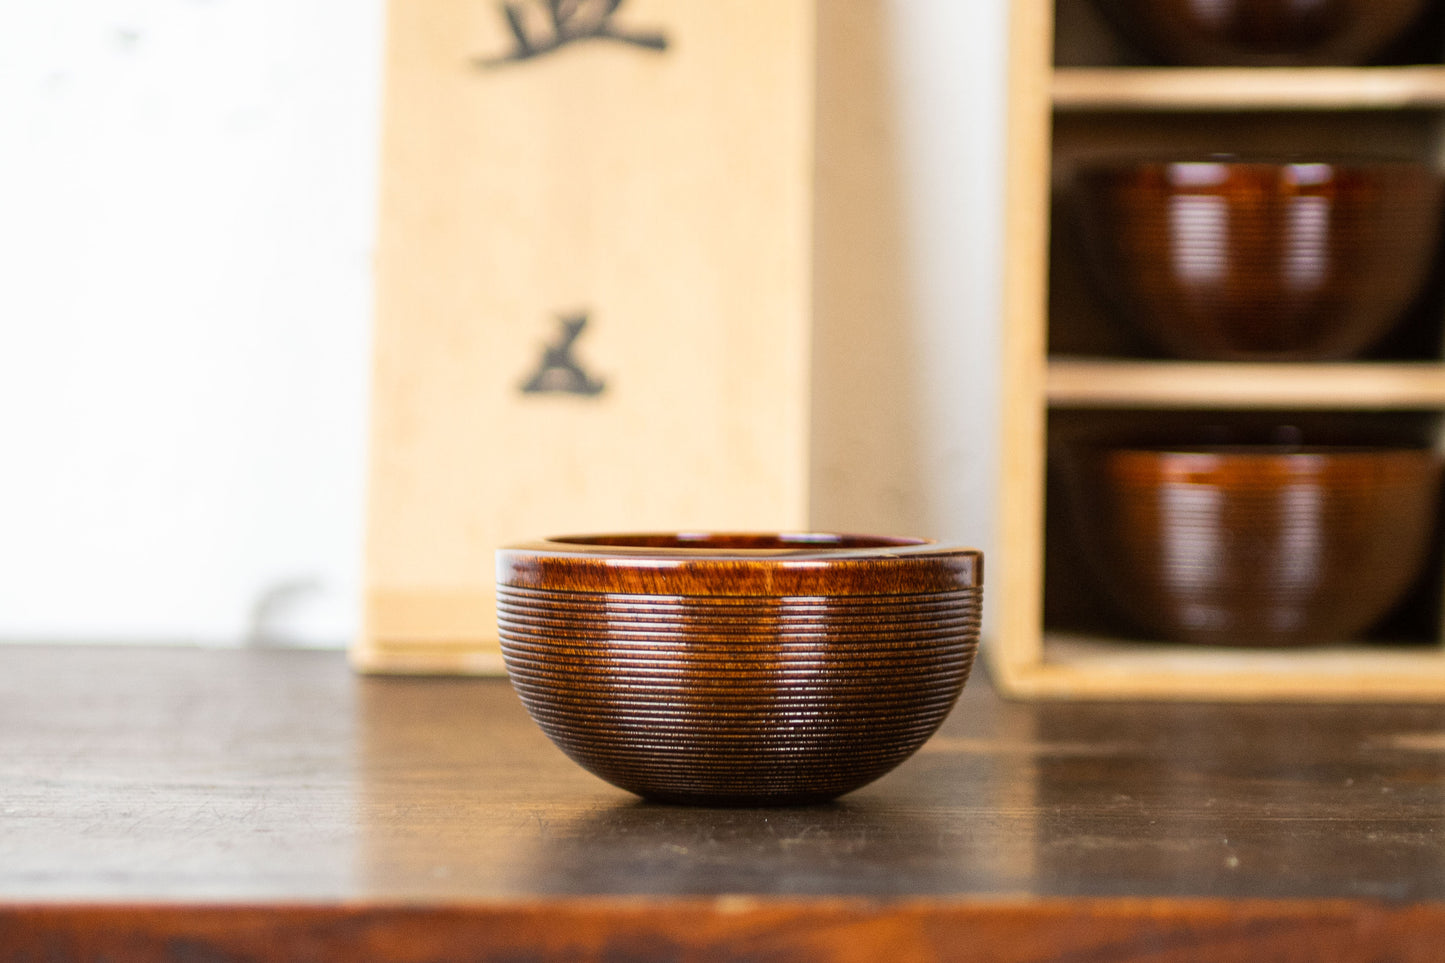 Set of 5 wooden vessels in wooden box.